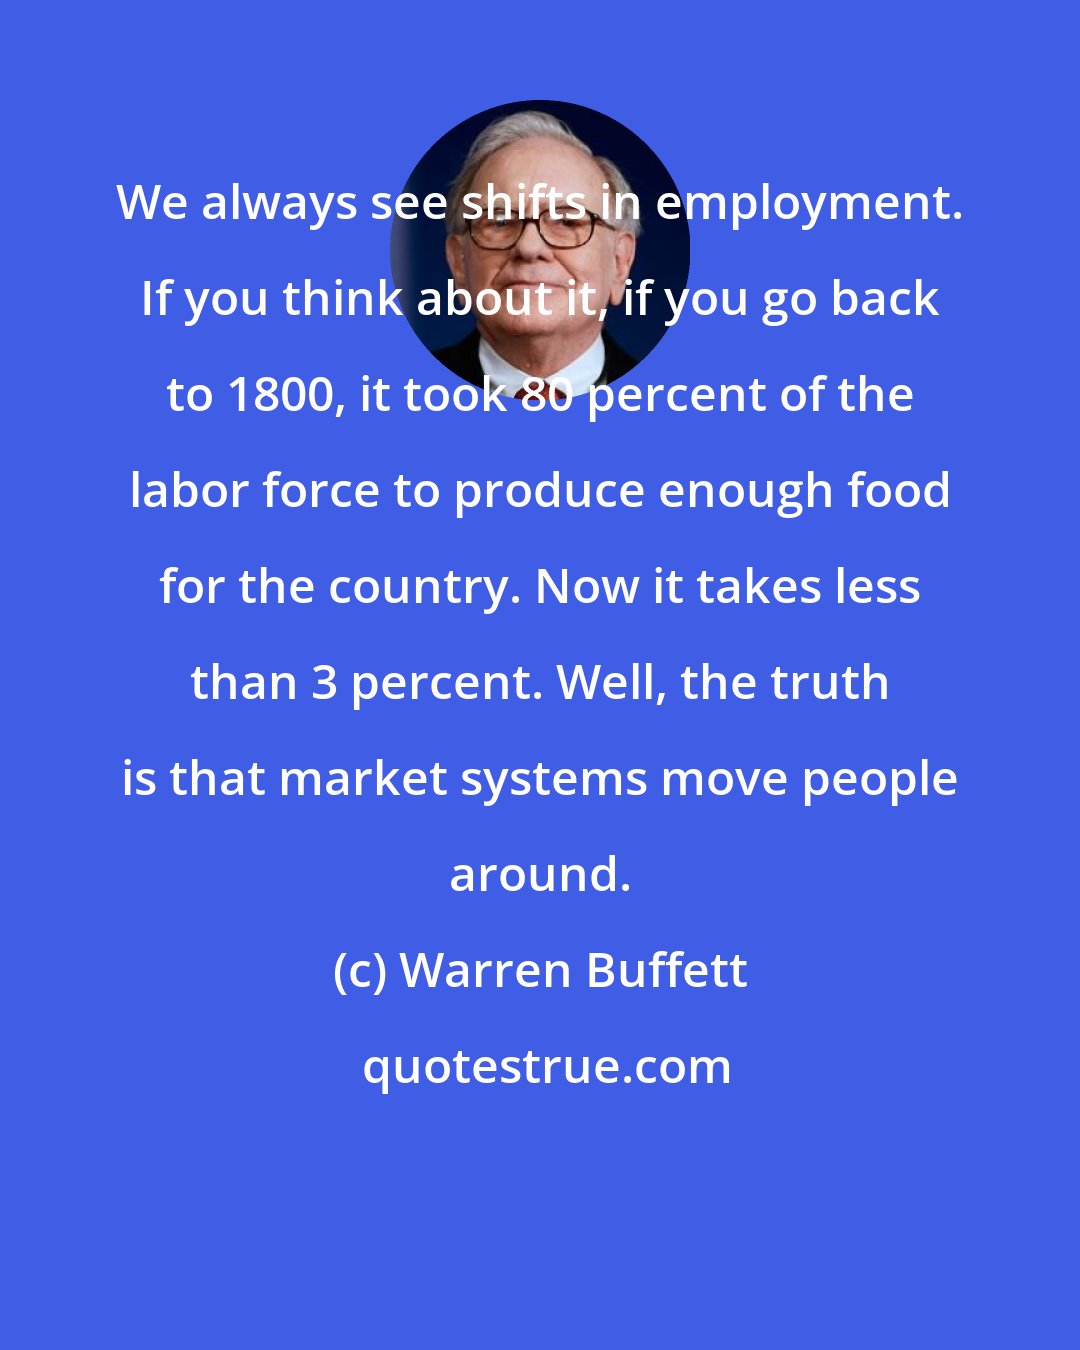 Warren Buffett: We always see shifts in employment. If you think about it, if you go back to 1800, it took 80 percent of the labor force to produce enough food for the country. Now it takes less than 3 percent. Well, the truth is that market systems move people around.